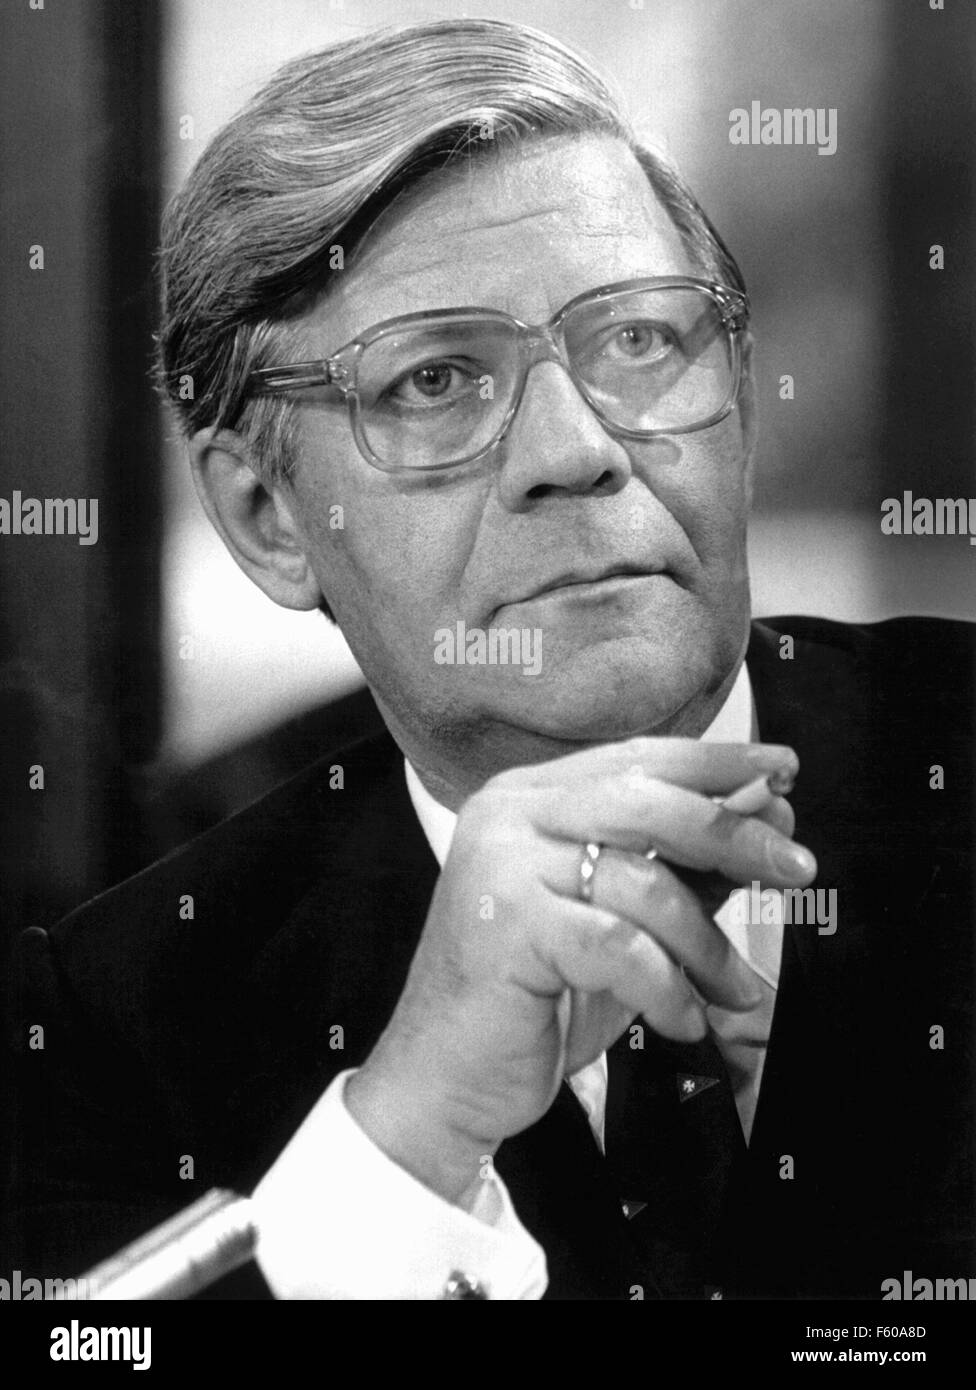 German chancellor Helmut Schmidt, typically with cigarette, during a press conference on 19 October 1978 in Bonn. Stock Photo